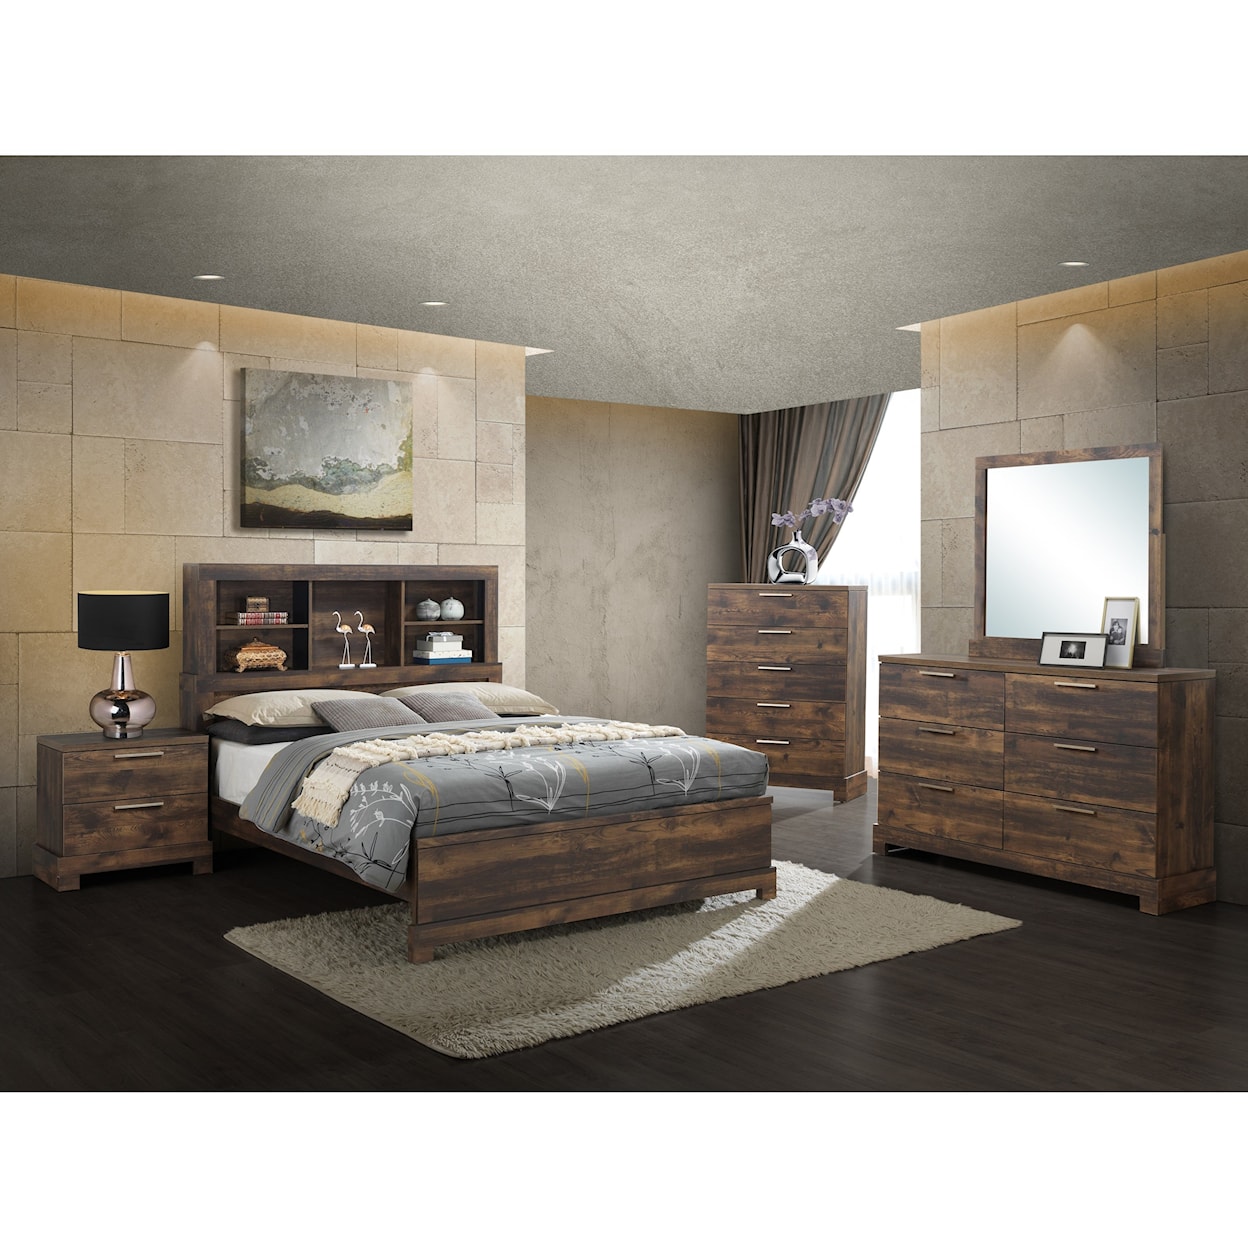 New Classic Campbell King Bedroom Group